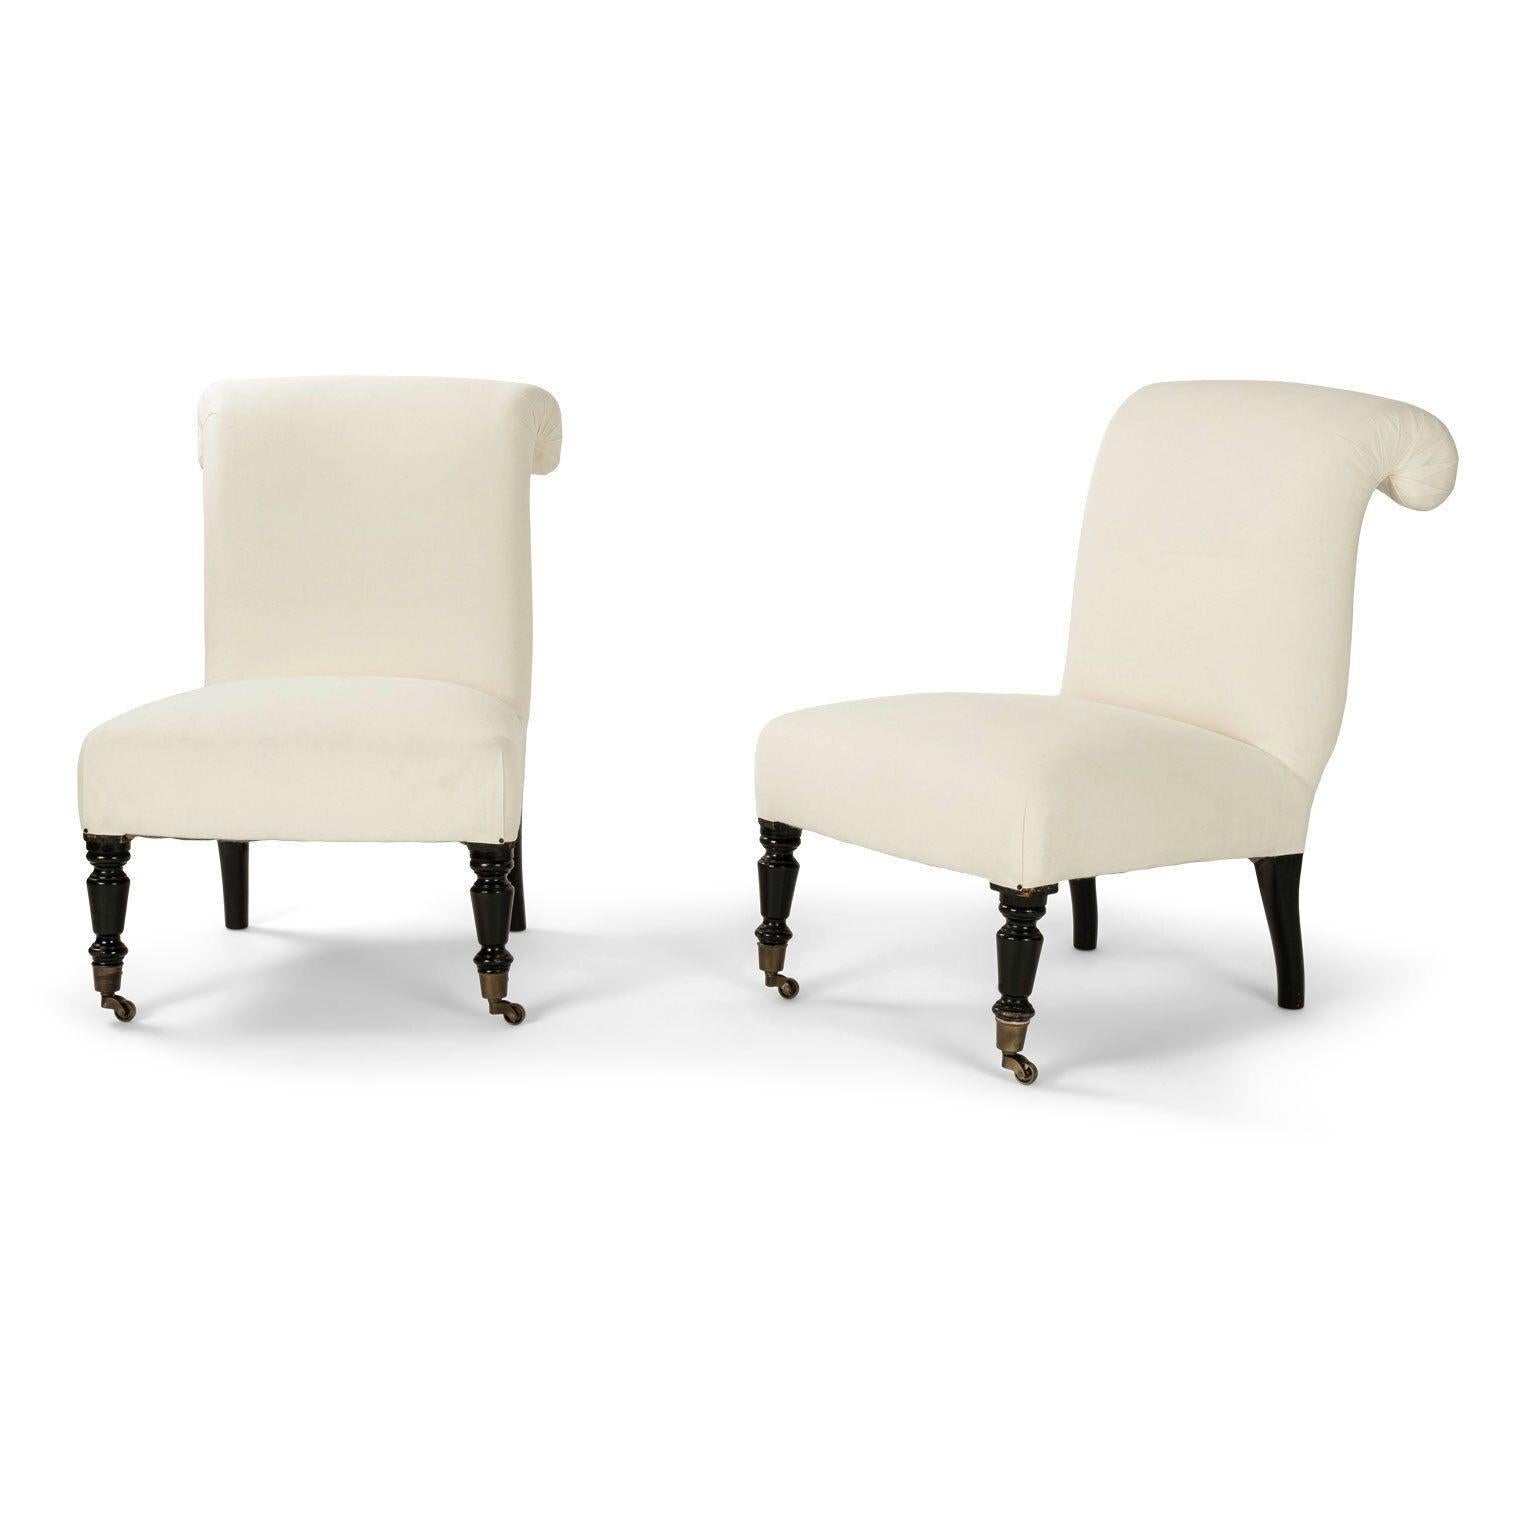 Pair of French Napoleon III slipper chairs circa 1870-1890. Newly upholstered in off-white muslin. Ebonized legs. Later brass casters on front legs. Two available and sold together as a pair priced $5,200.